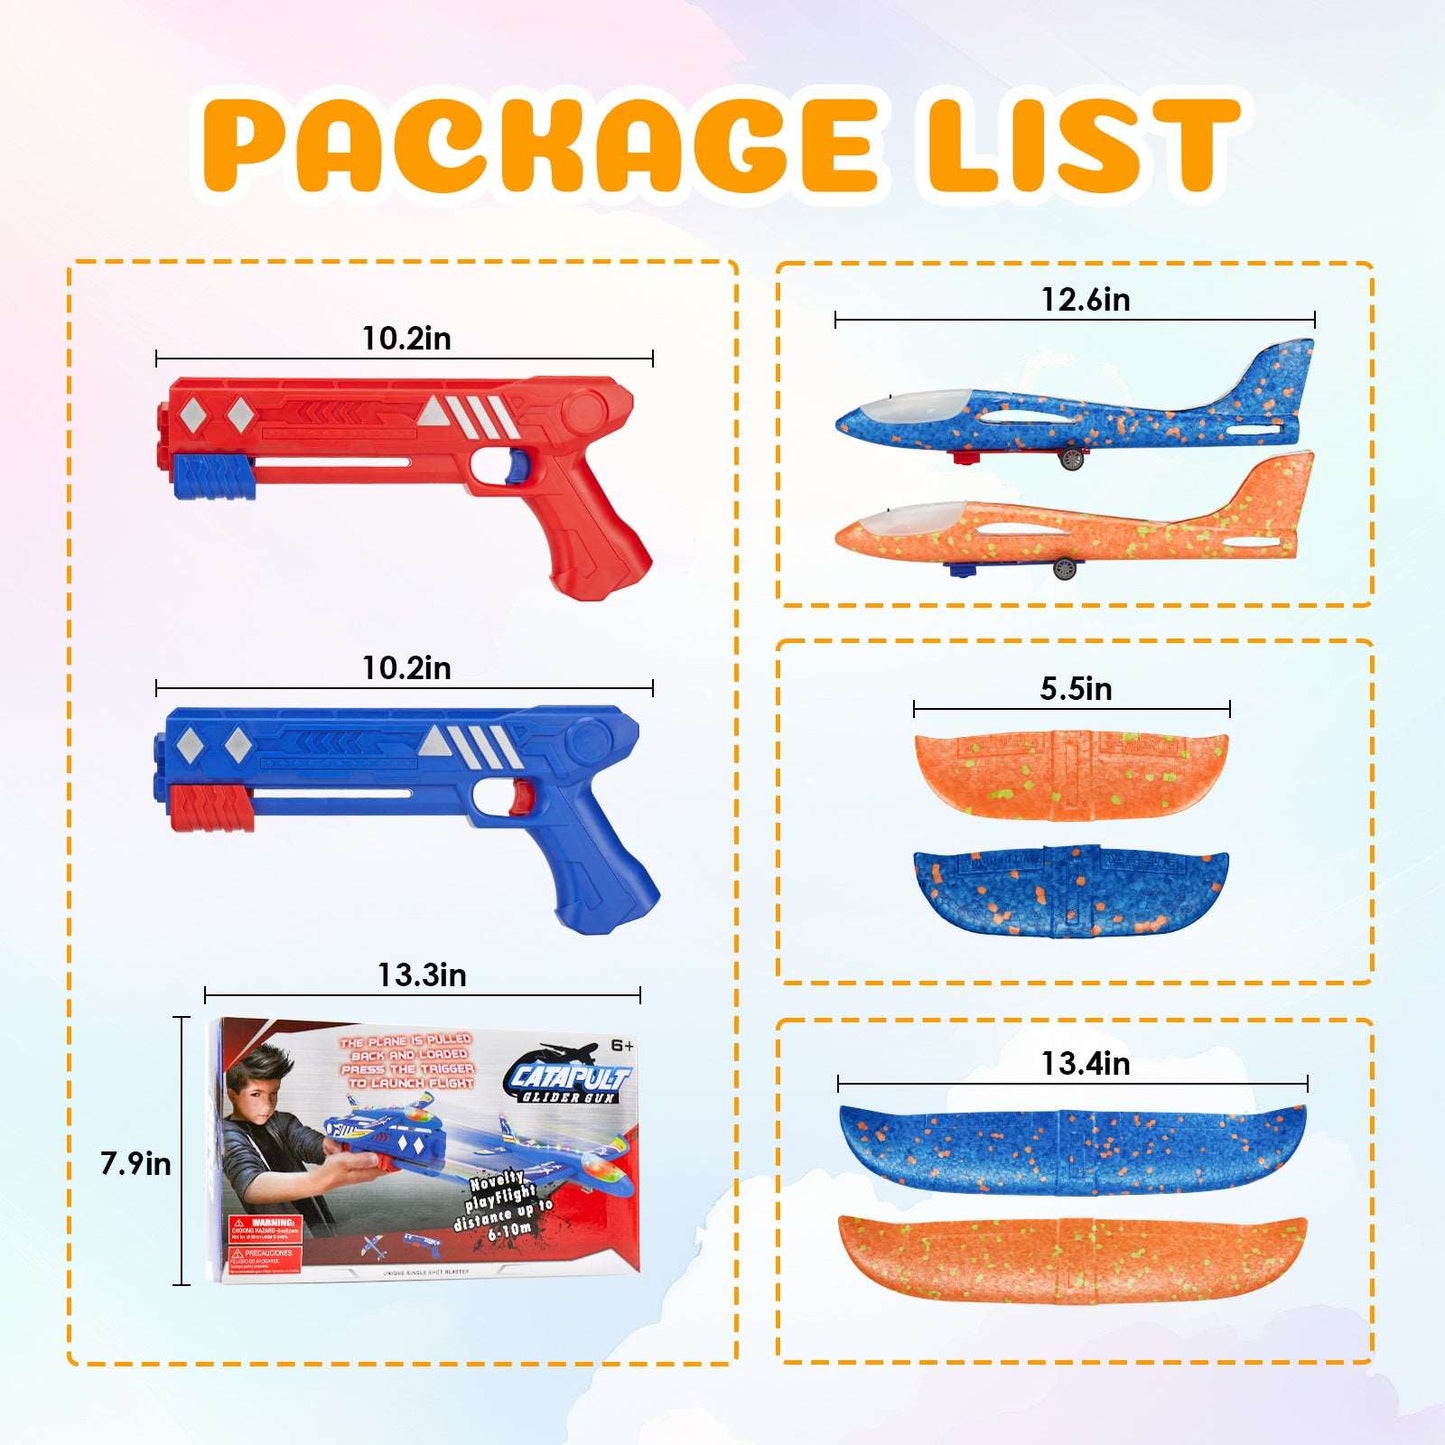 2 Pack Airplane Toys with Launcher.